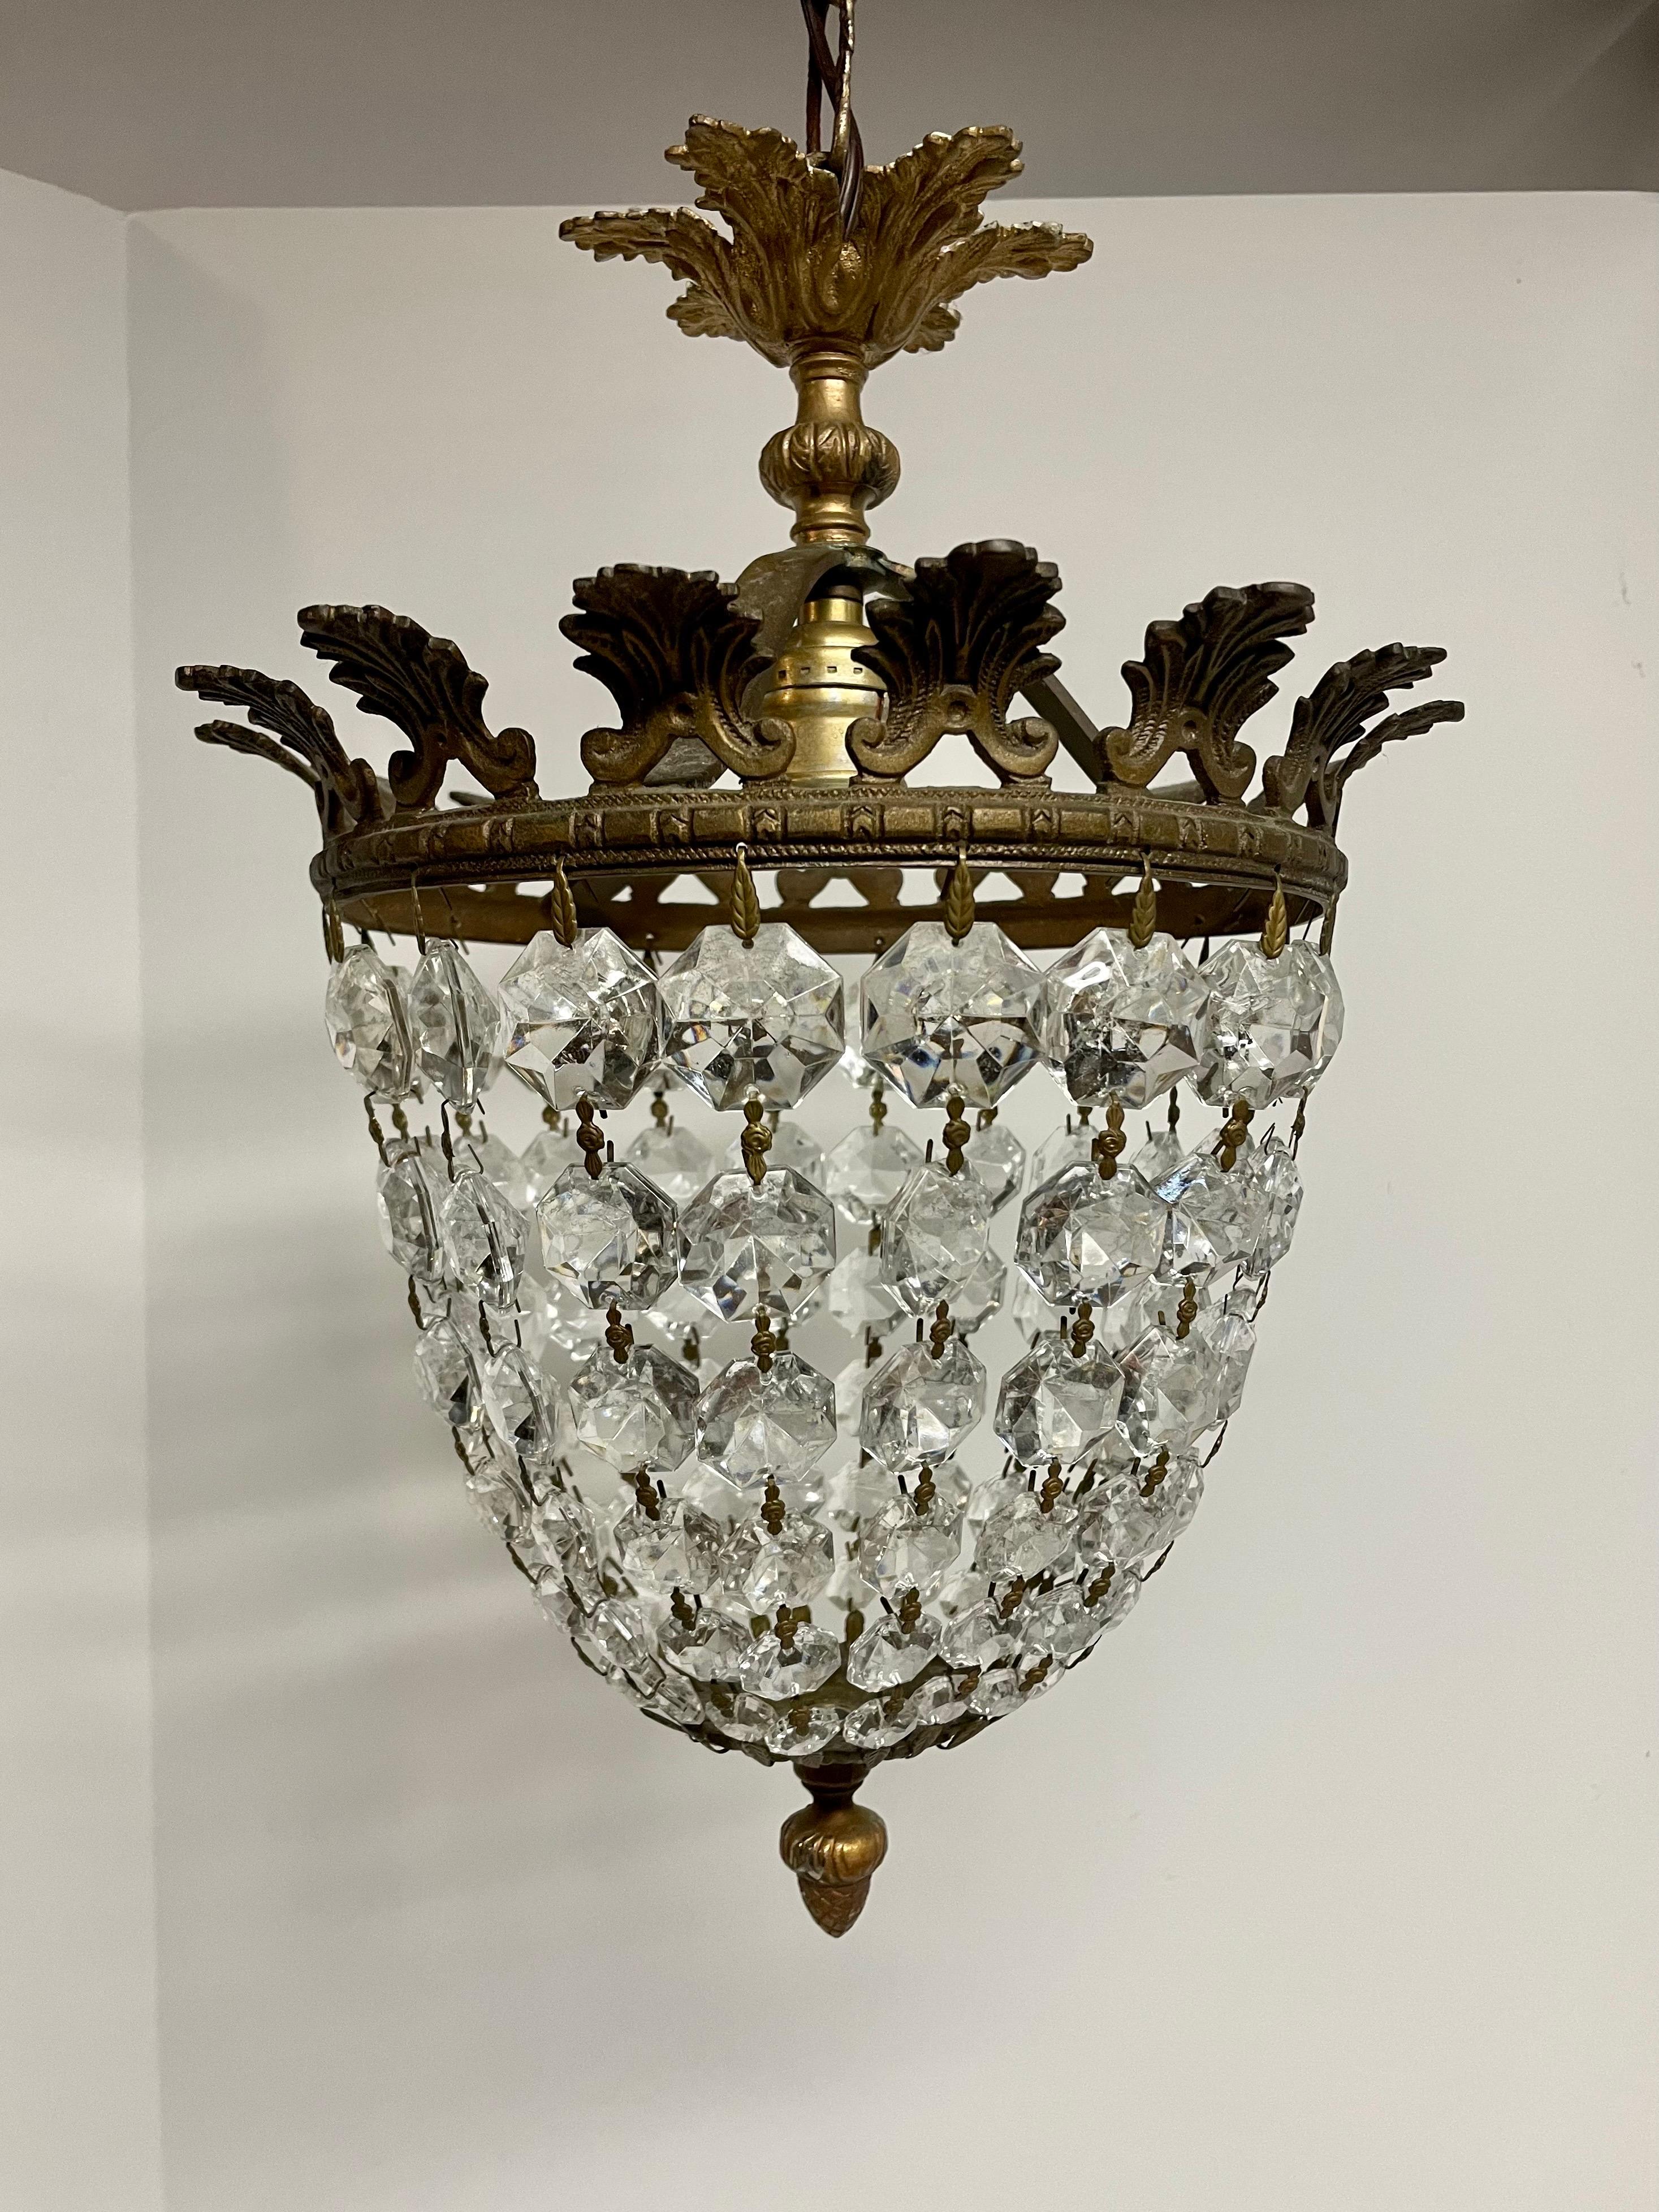 Bronze and Crystal French Style Chandelier featuring shimmering graduated size crystal chains mounted on a detailed bronze frame. Rewired with brown wire and brass medium base socket. Chandelier measures 10.5